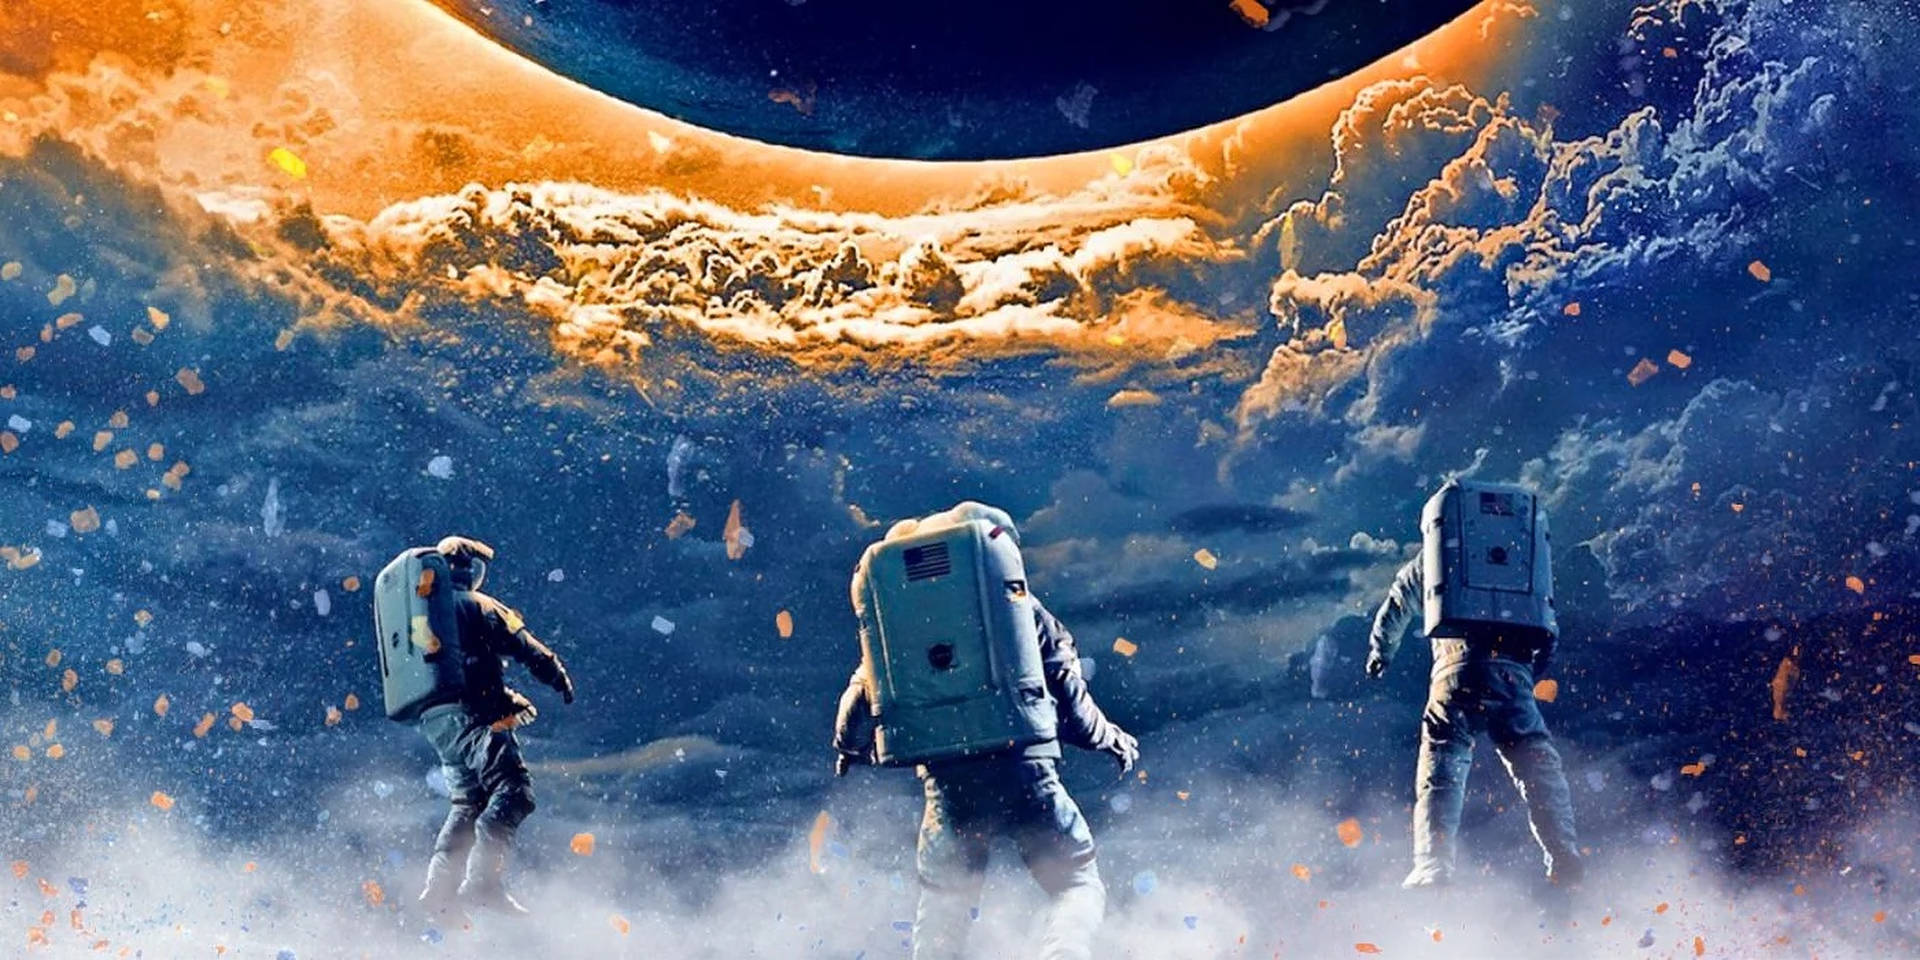 Floating Astronauts In Space Moonfall Background